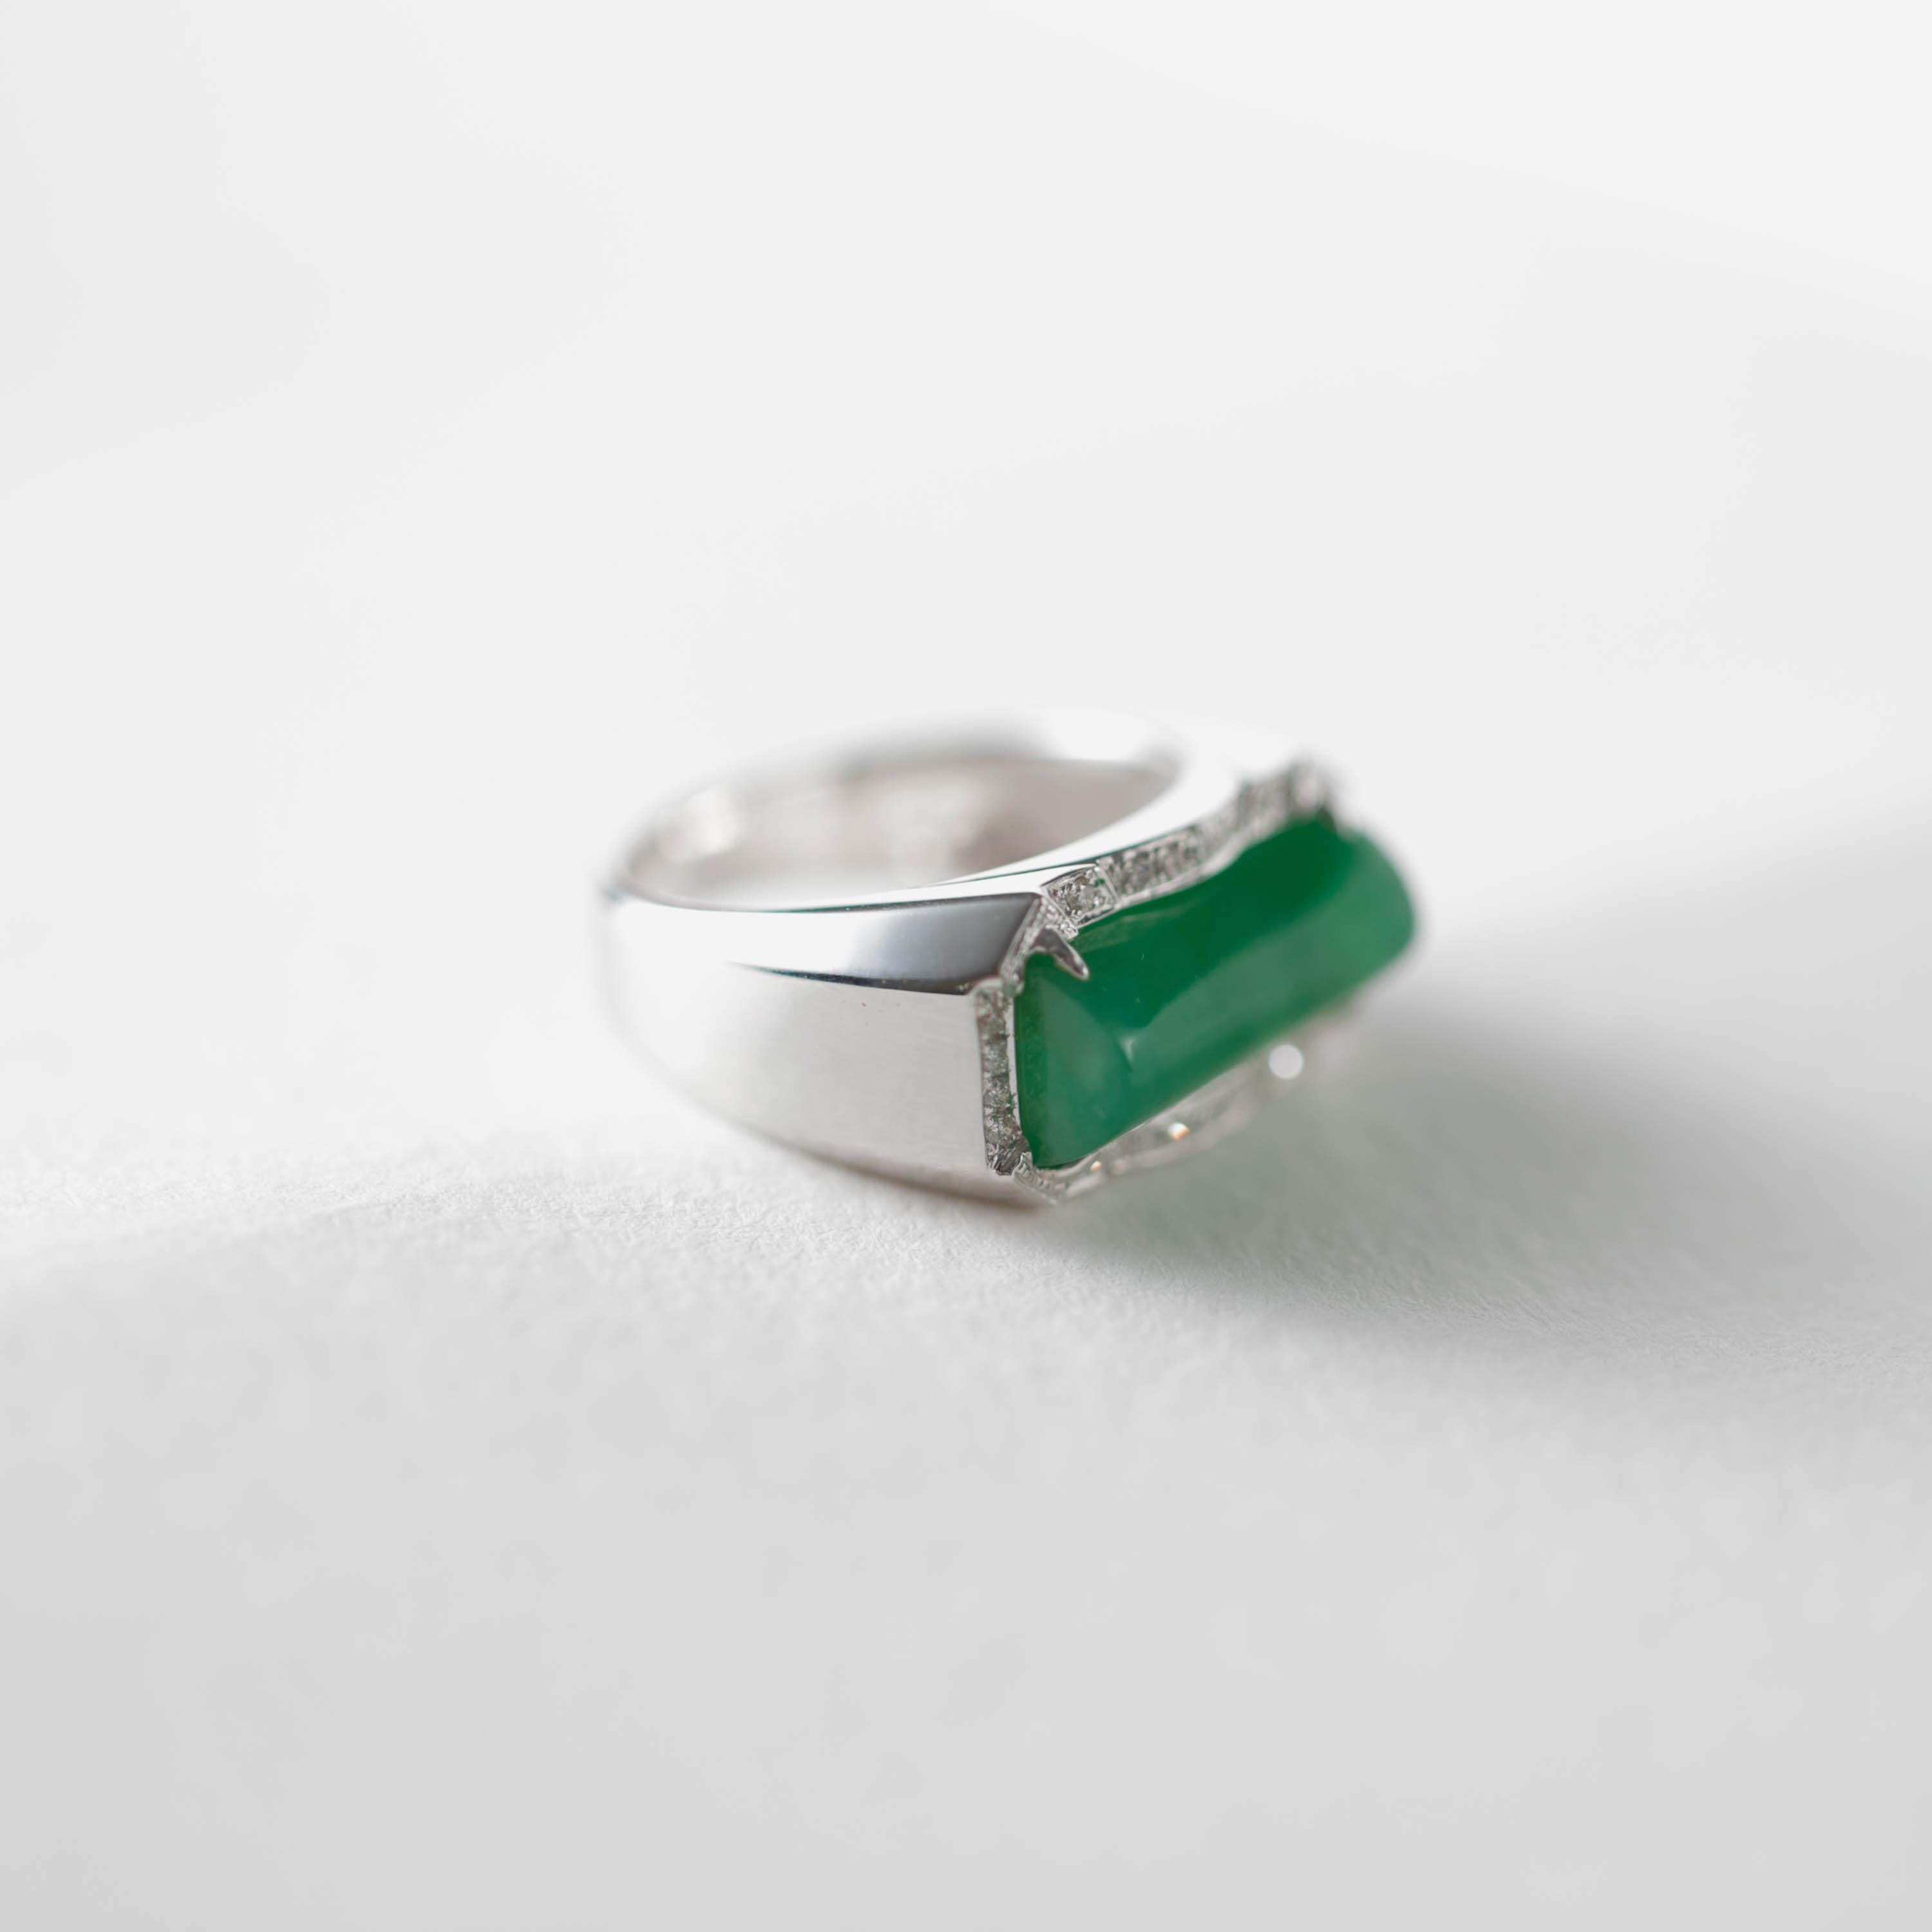 Cabochon Jade Ring with Diamonds Certified Untreated, New & Unworn Size 9.5 For Sale